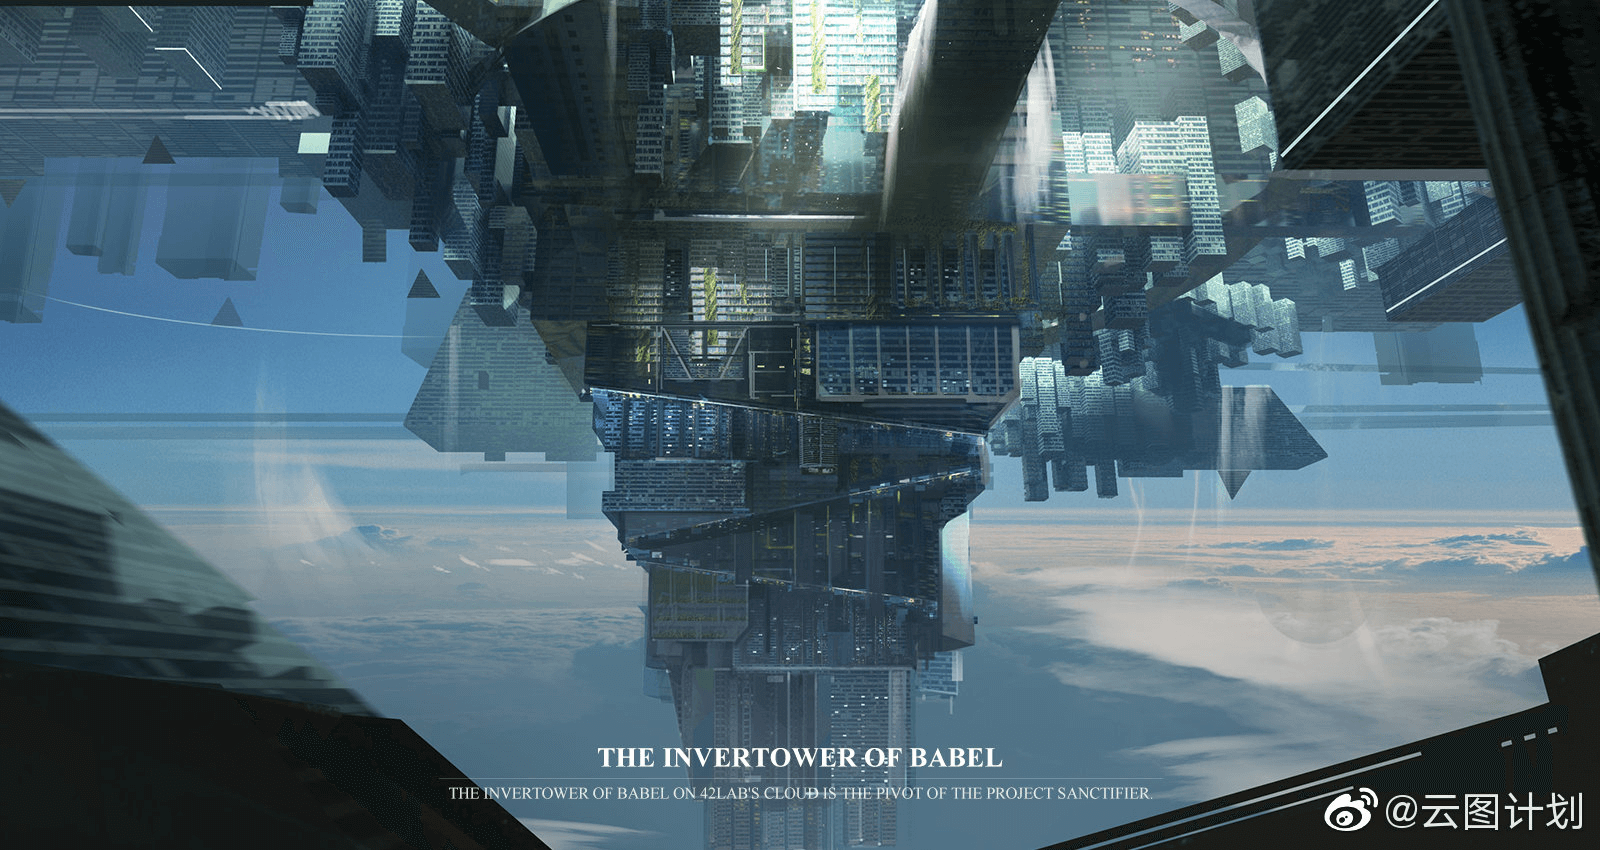 Inverted Tower of Babel